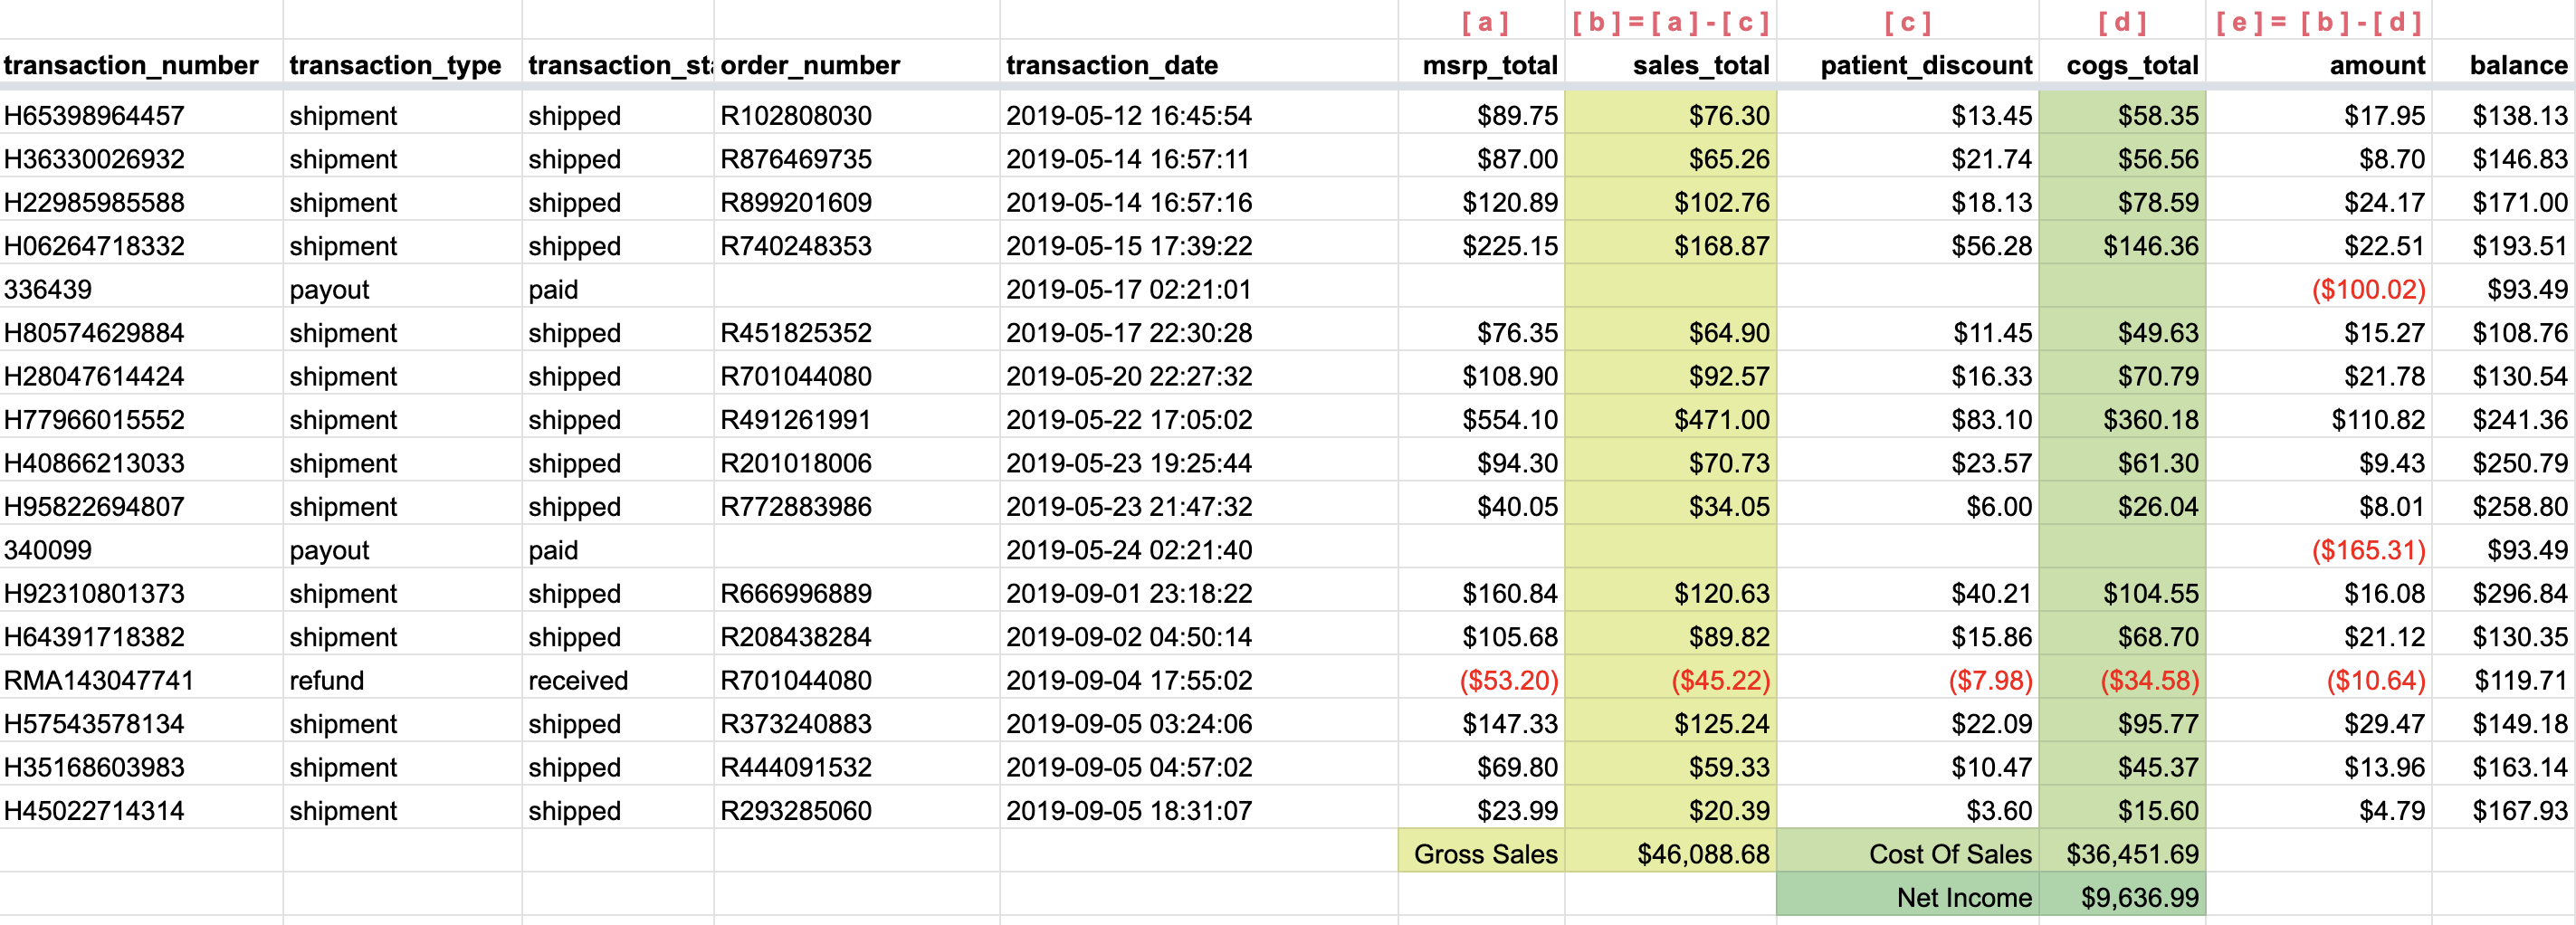 an example of the account activity and balance report with net sales, cost of sales, and net income calculated